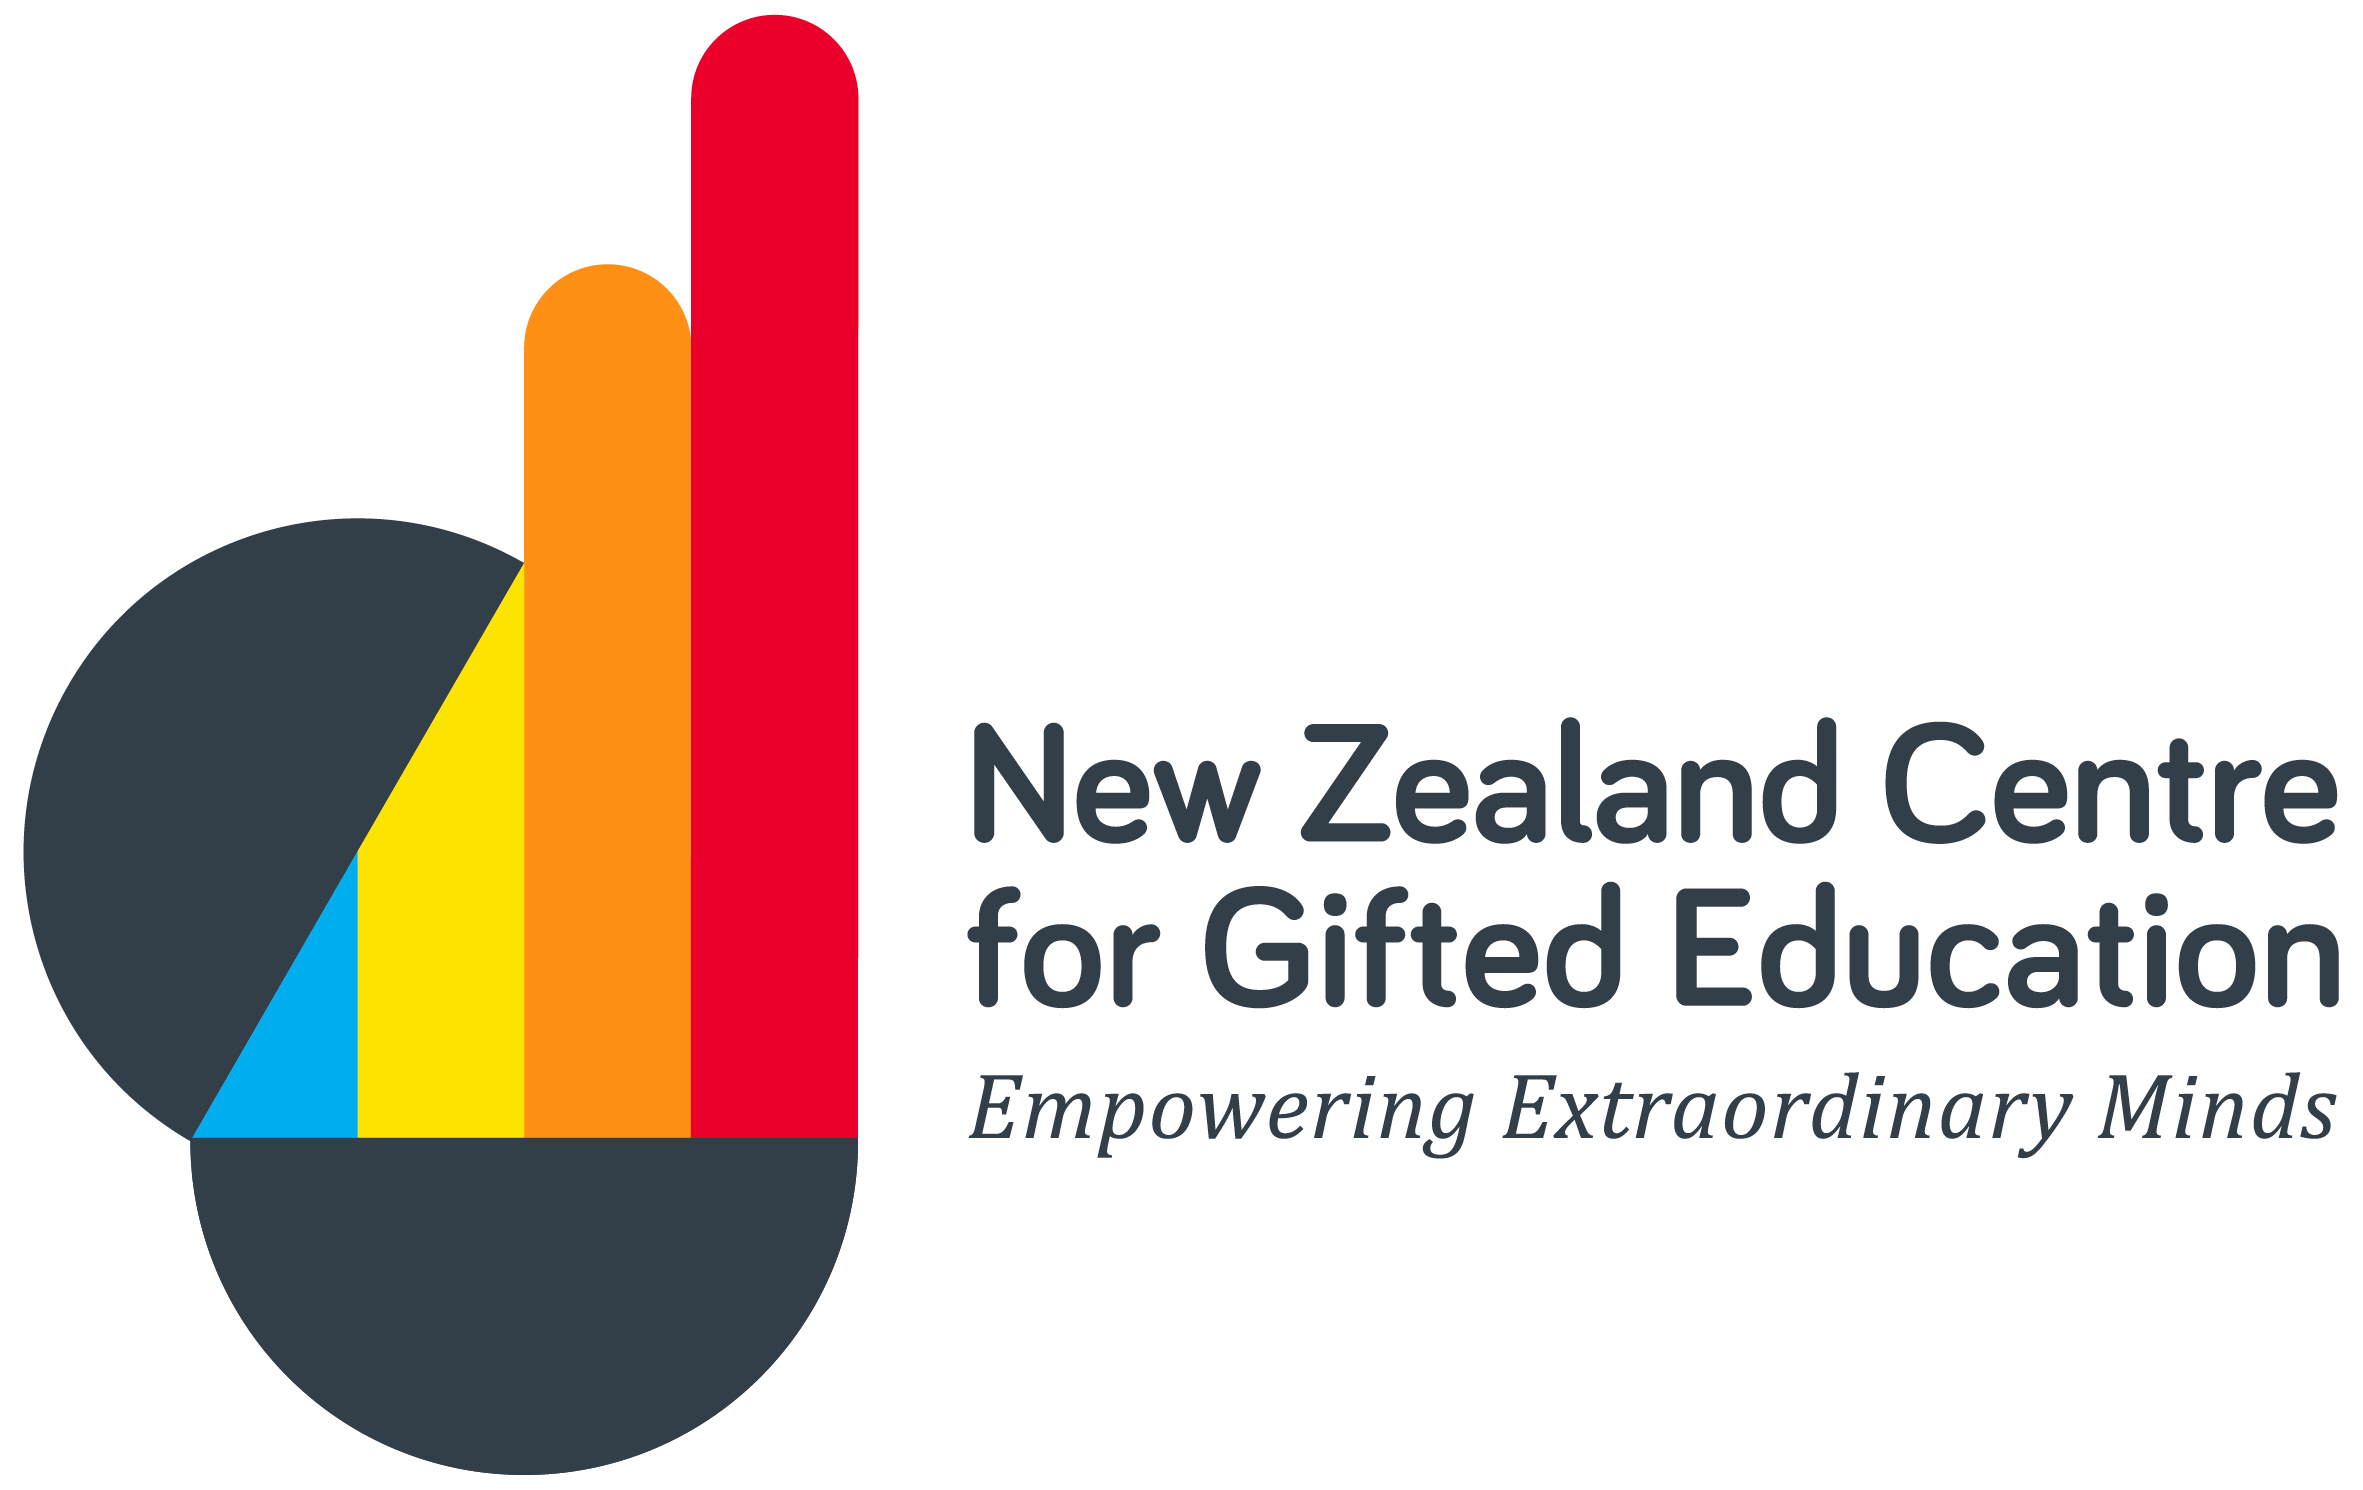 New Zealand Centre for Gifted Education